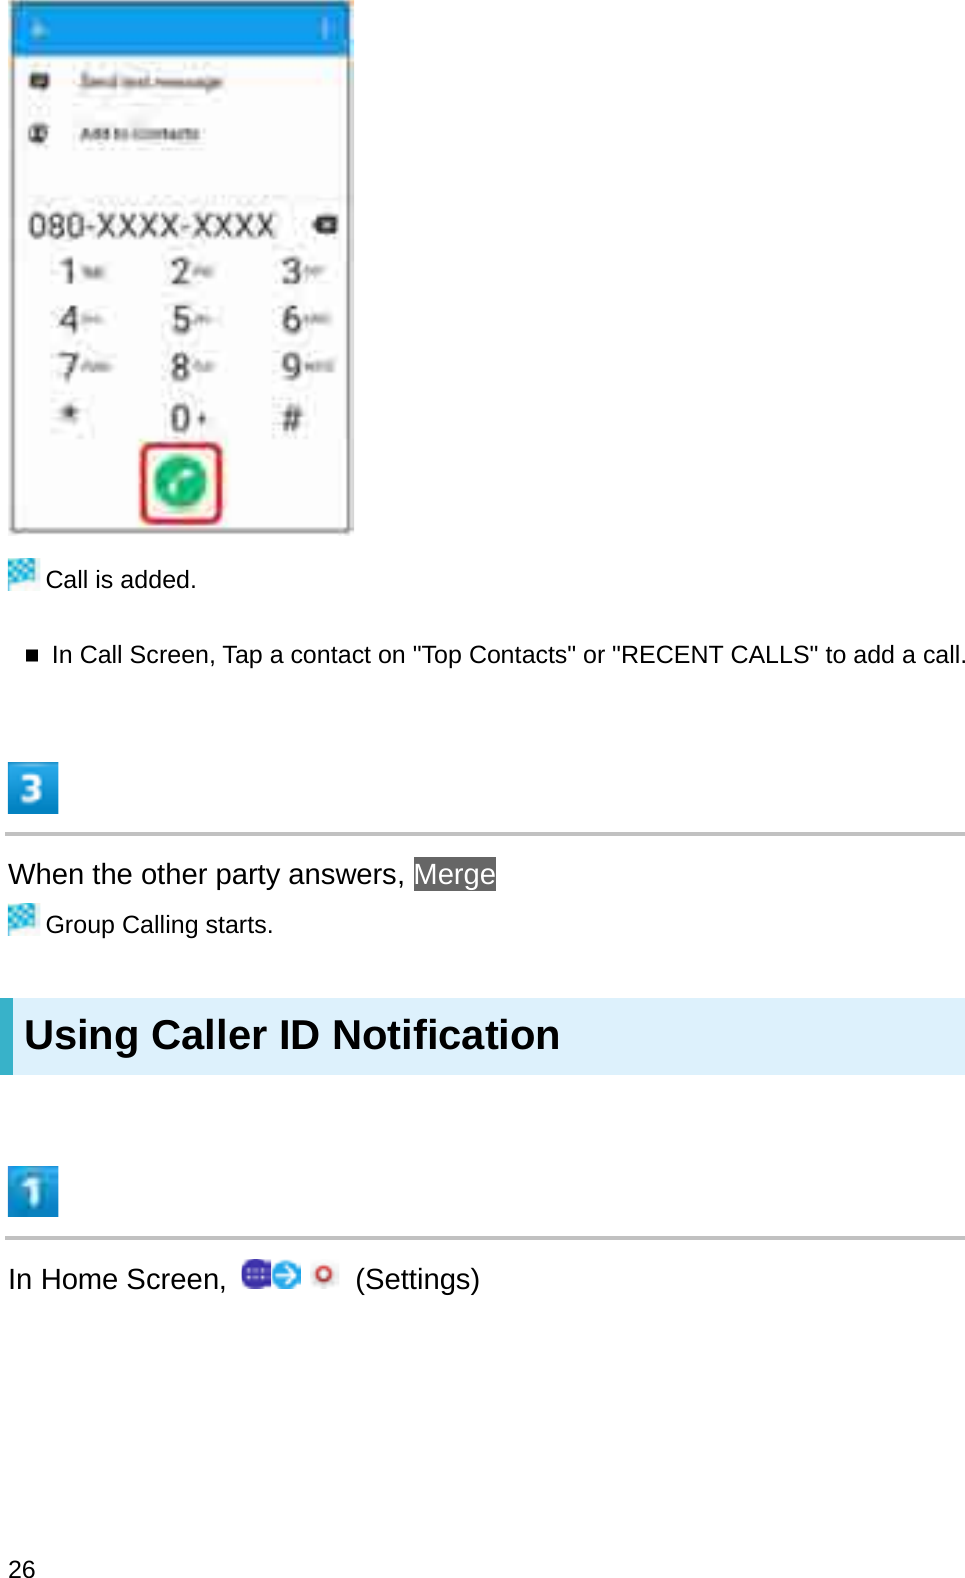 Call is added.In Call Screen, Tap a contact on &quot;Top Contacts&quot; or &quot;RECENT CALLS&quot; to add a call.When the other party answers, MergeGroup Calling starts.Using Caller ID NotificationIn Home Screen,  (Settings)26